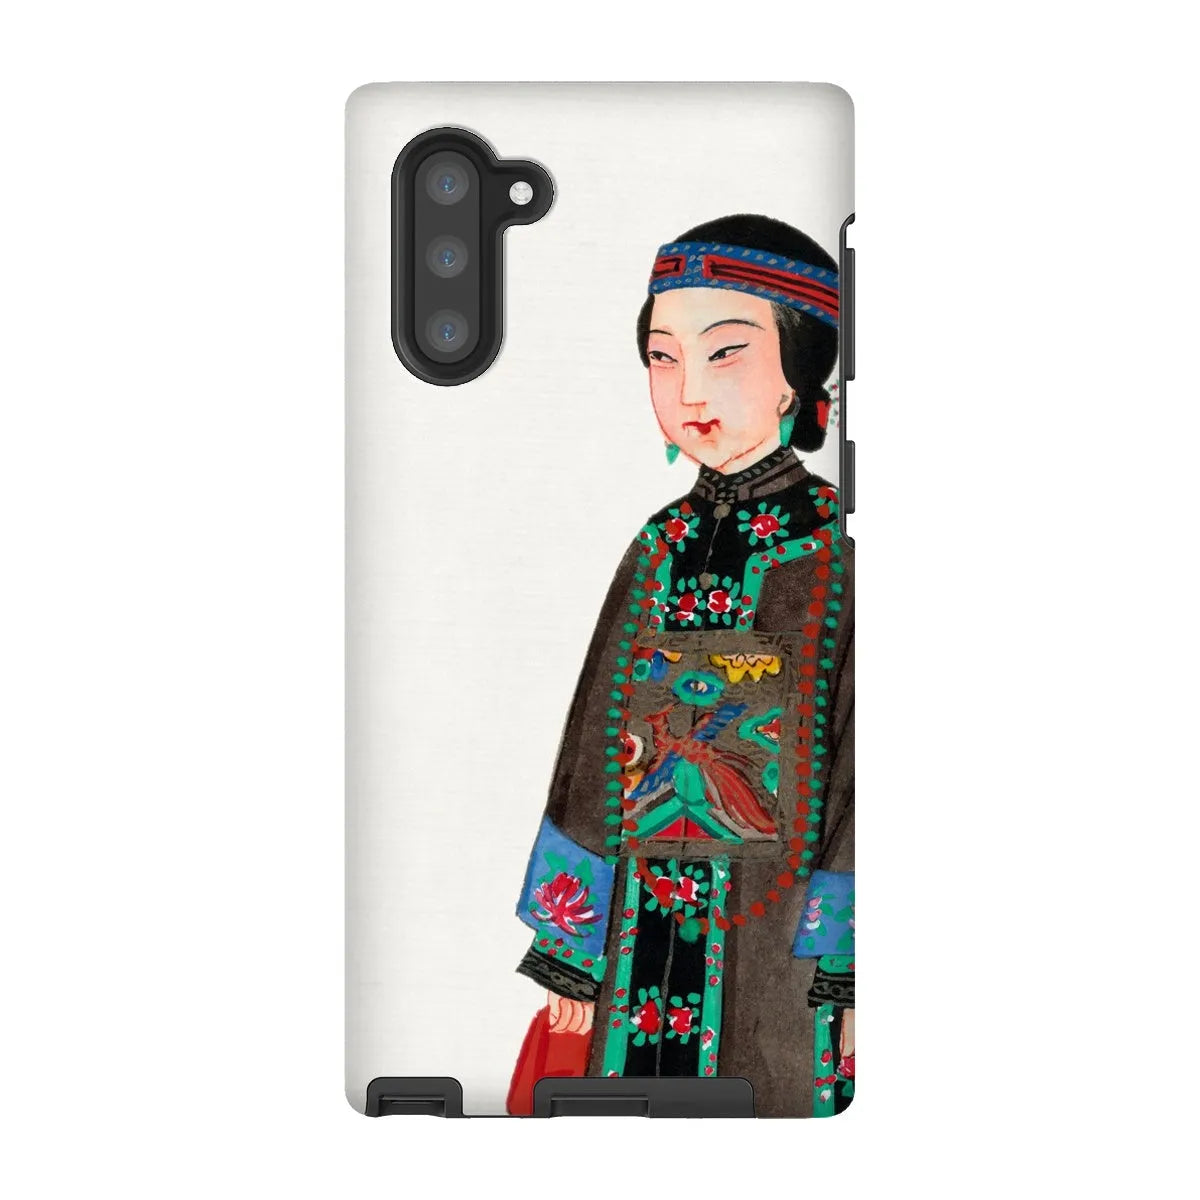 Noblewoman At Court - Chinese Aesthetic Art Phone Case - Samsung Galaxy Note 10 / Matte - Mobile Phone Cases